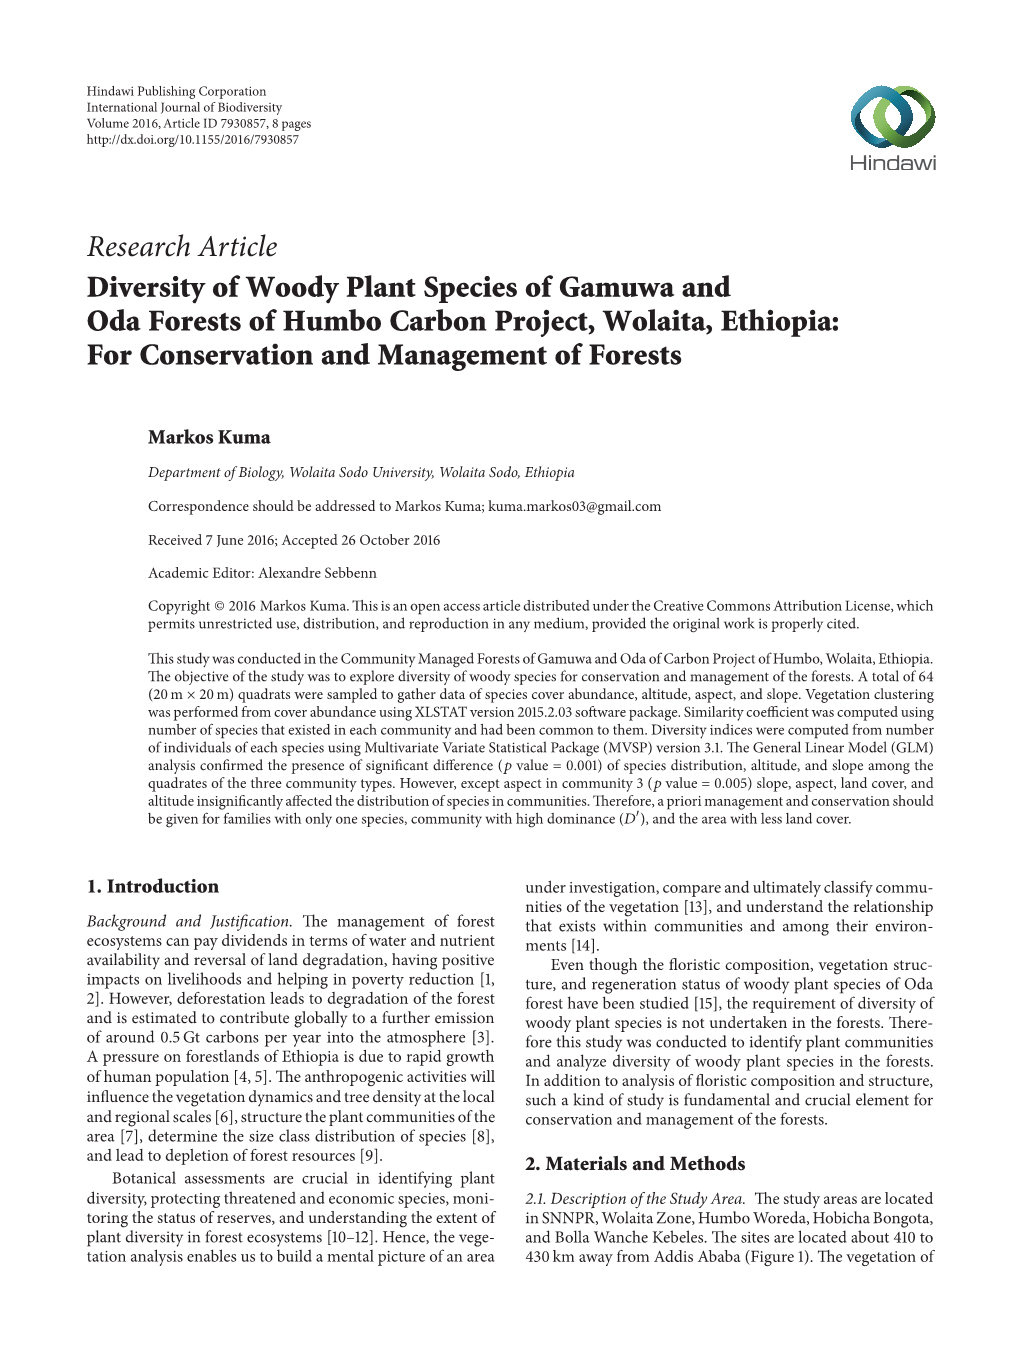 Research Article Diversity of Woody Plant Species of Gamuwa and Oda Forests of Humbo Carbon Project, Wolaita, Ethiopia: for Conservation and Management of Forests